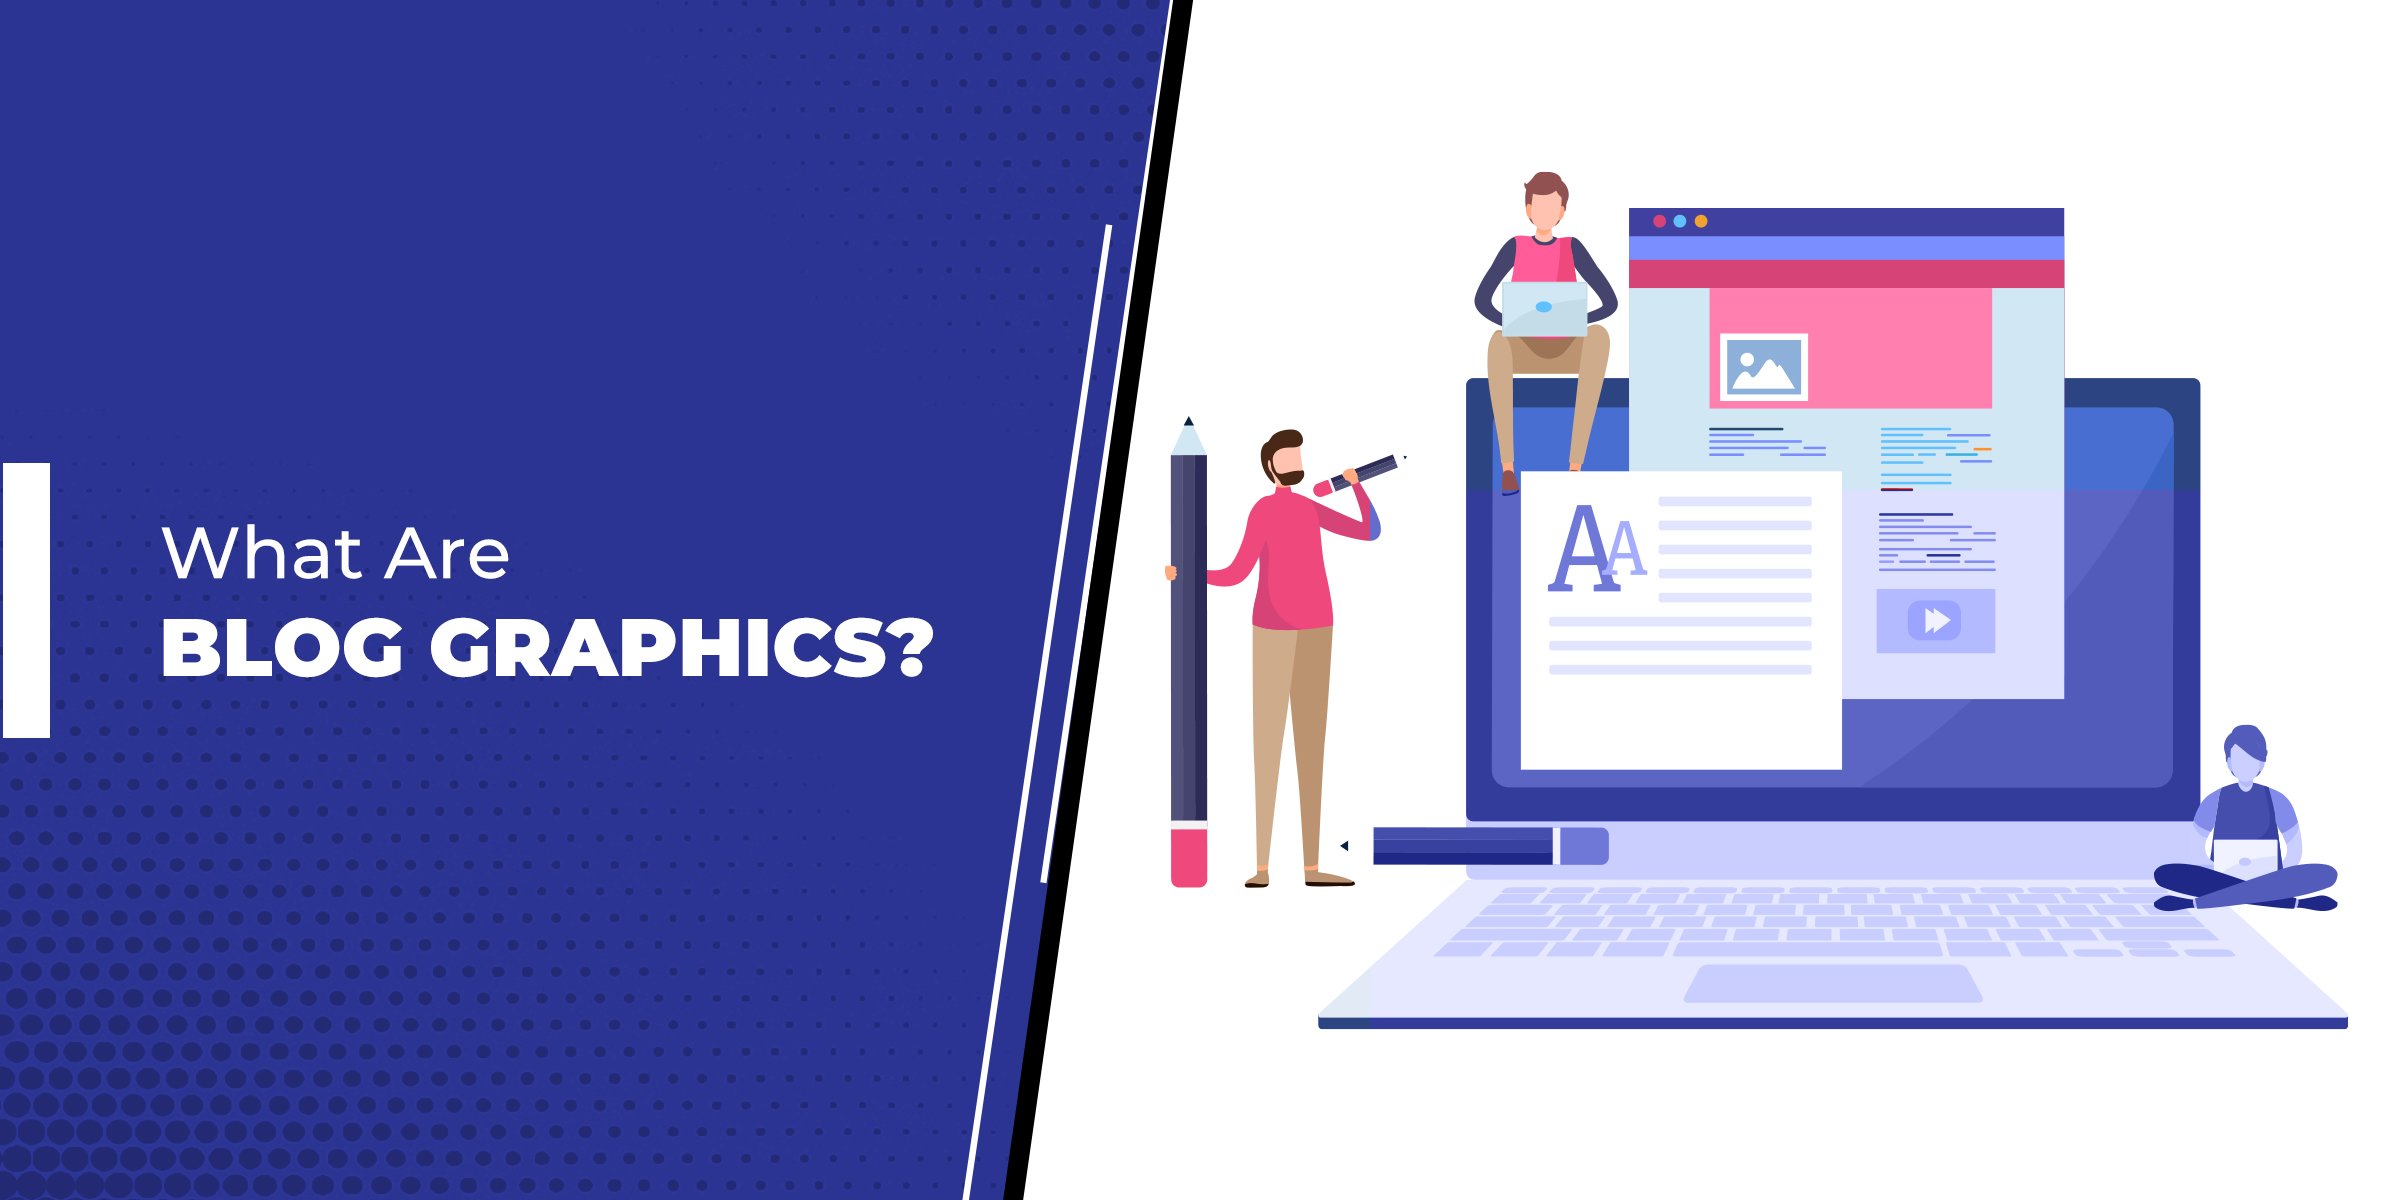 What Are Blog Graphics?